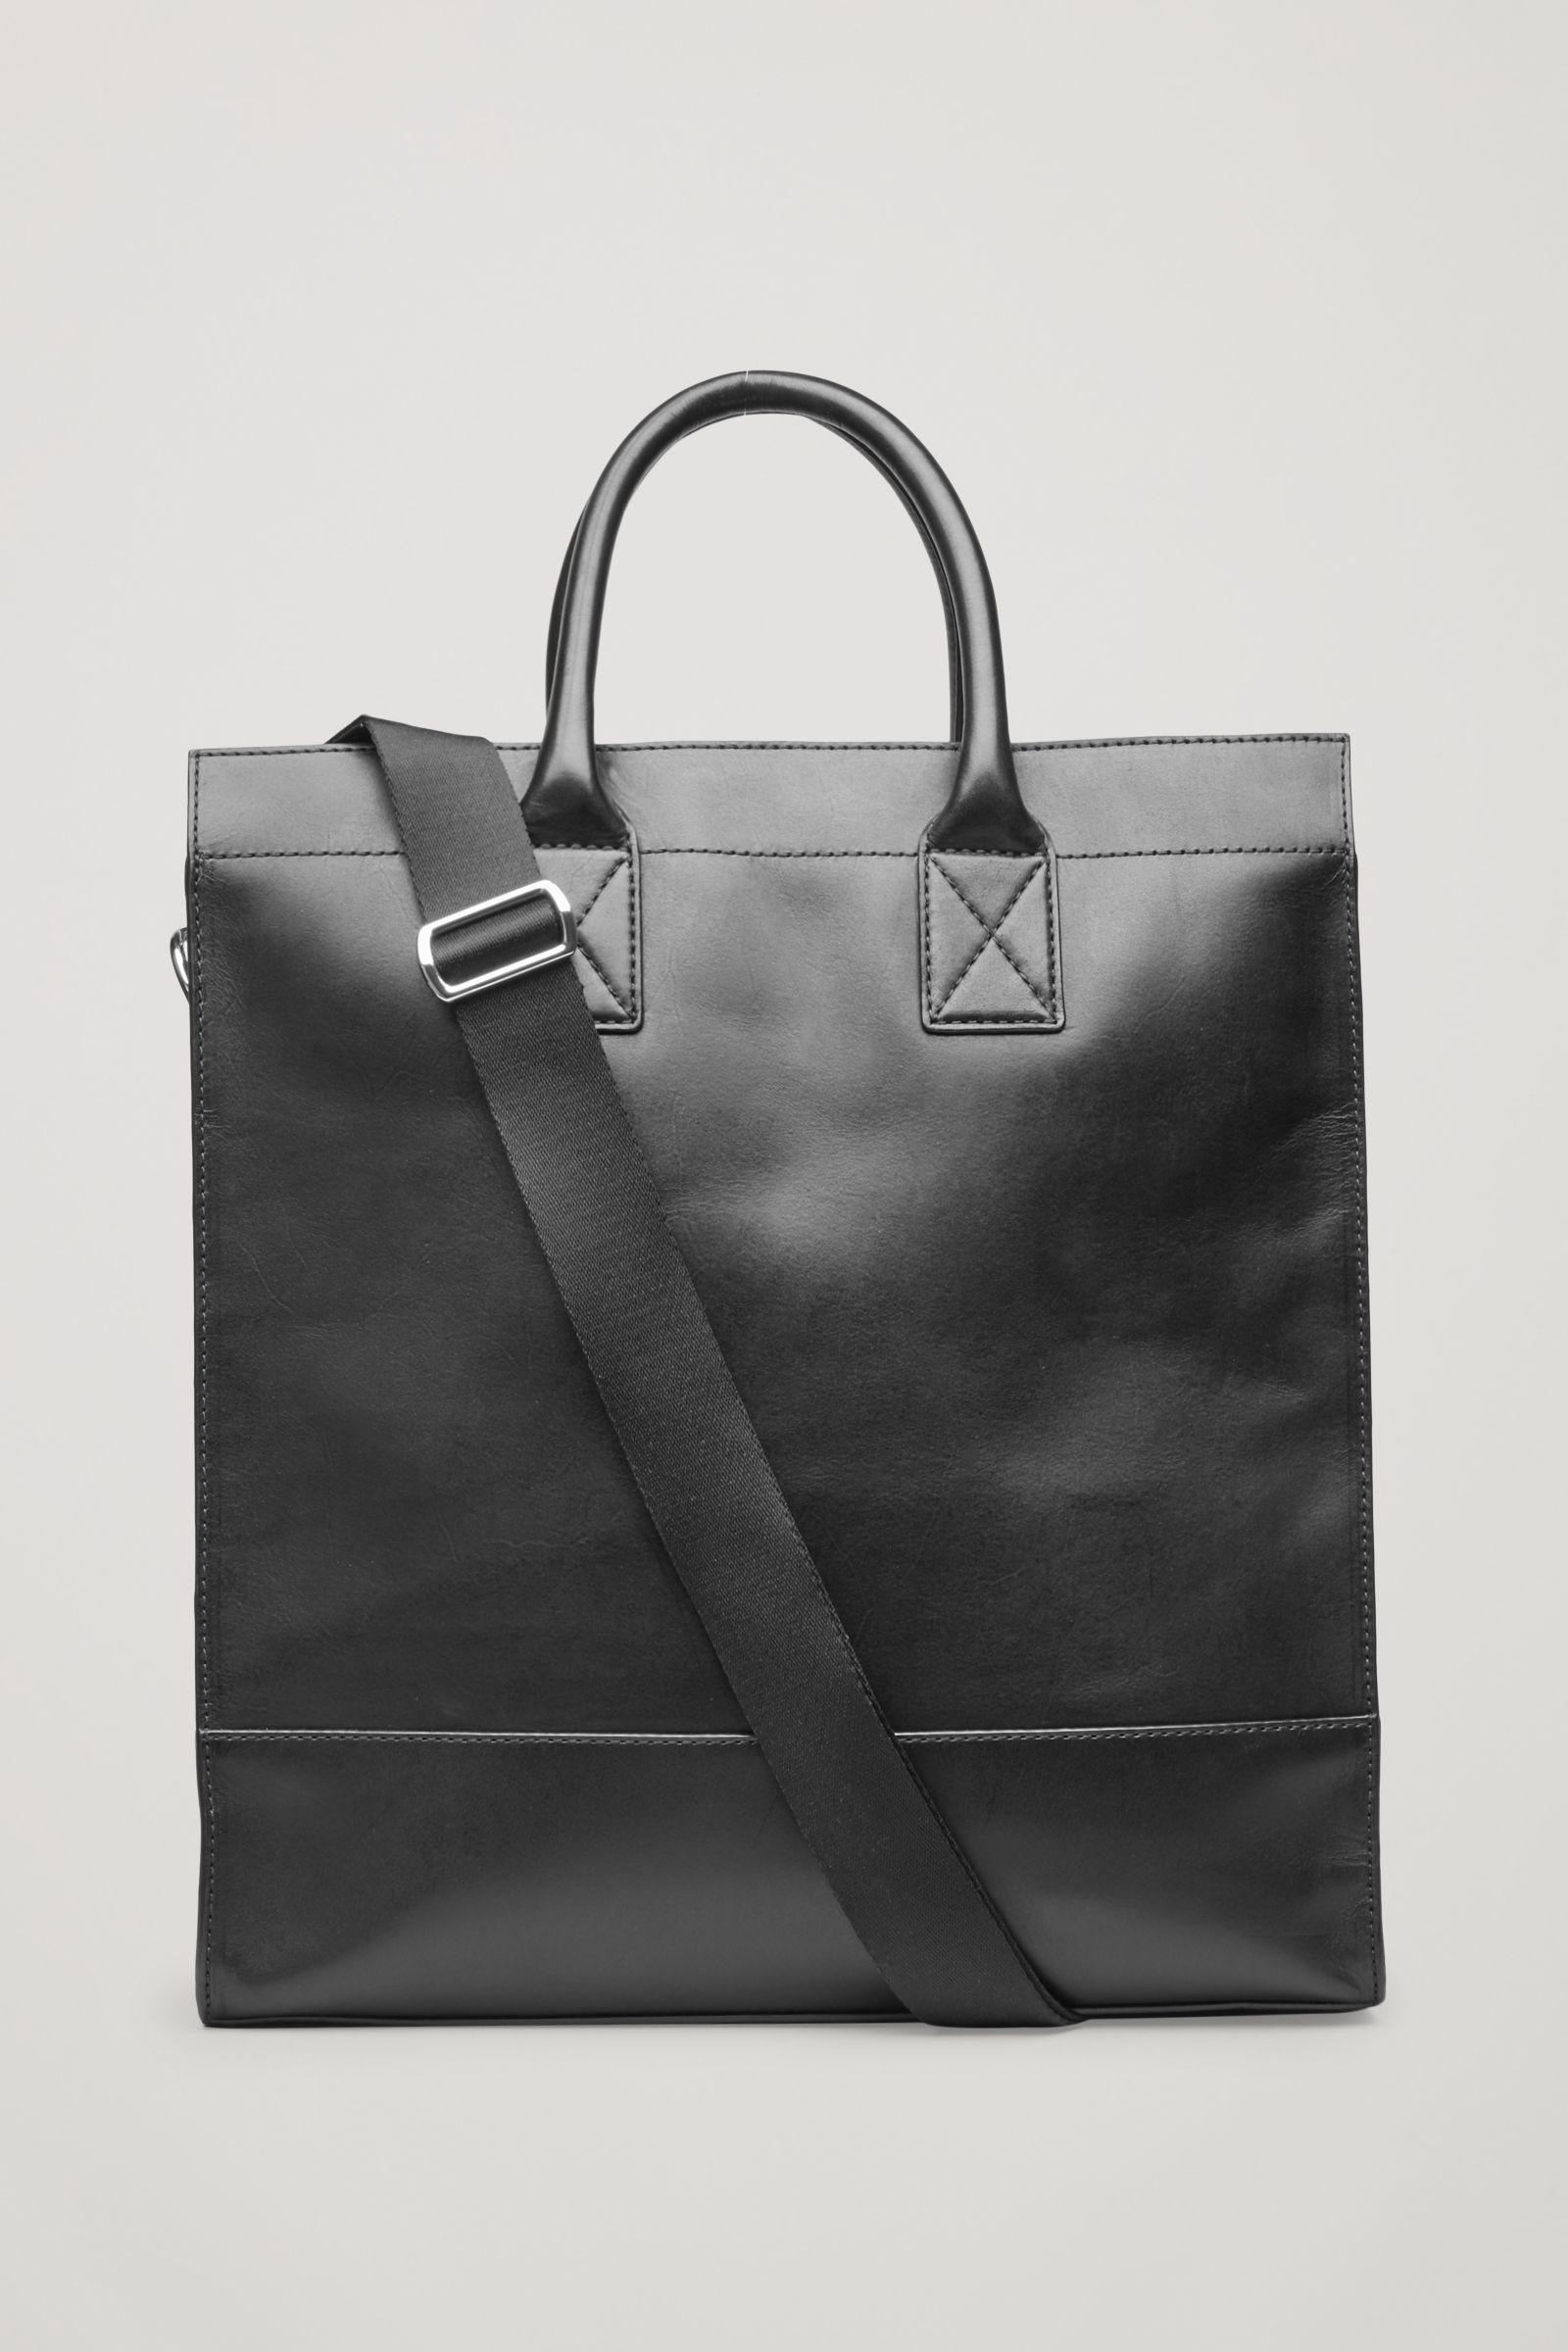 Lyst - Cos Leather Tote Bag in Black for Men